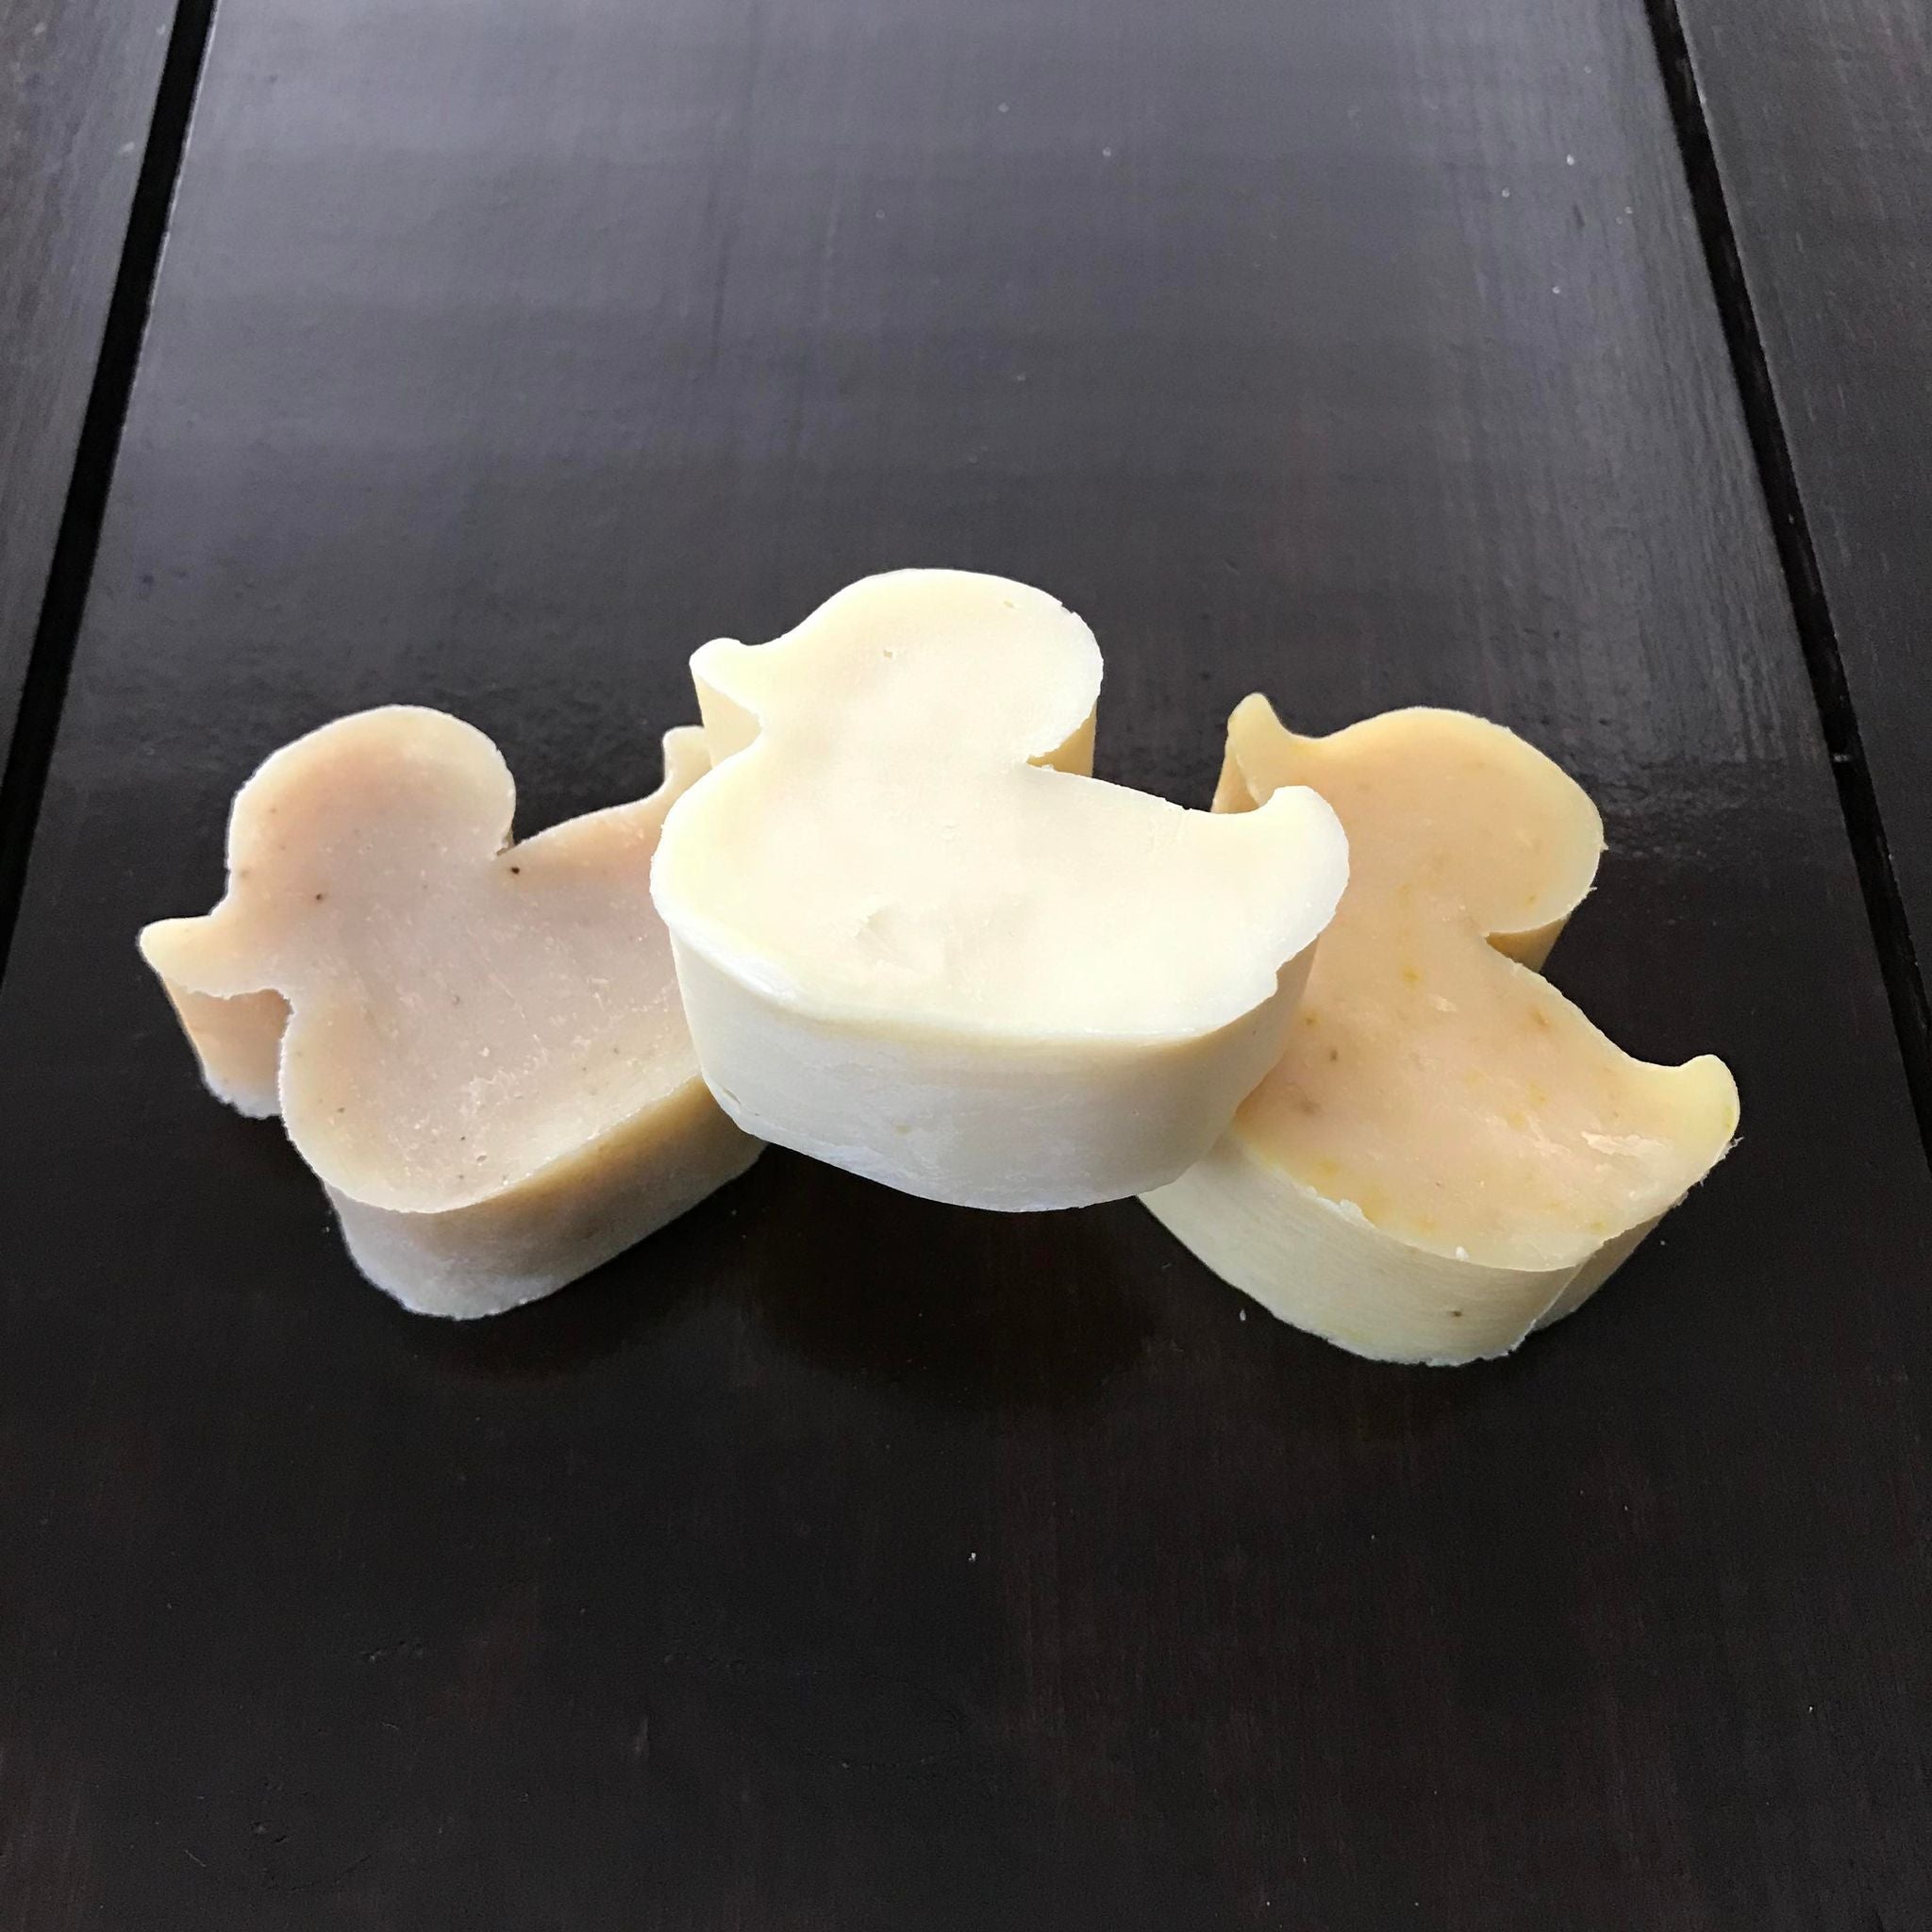 Vegan ducky soap made in Canada by Simply Natural Canada is available unpackaged in cucumber calendula, lavender chamomile or unscented